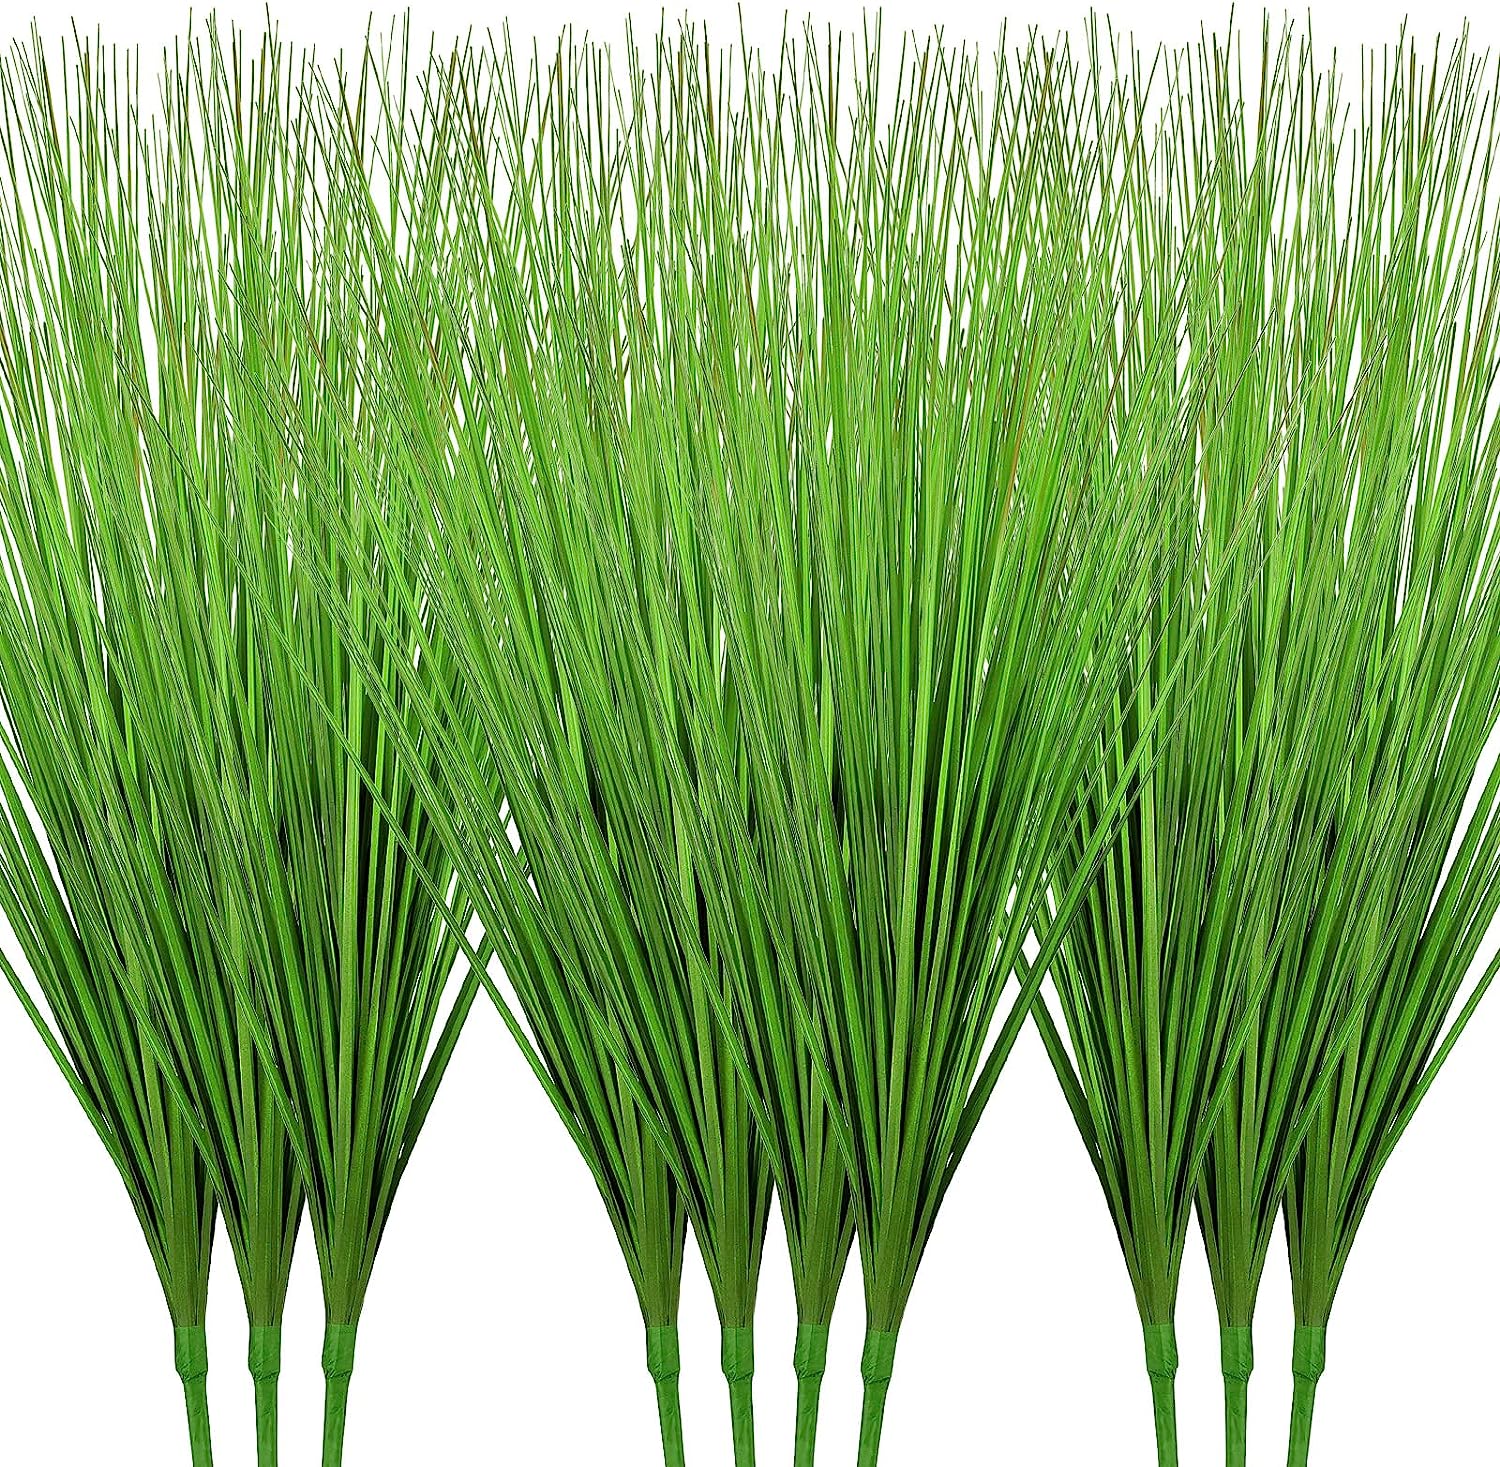 10 Pack Artificial Plants 27 Inch Tall Onion Grass [...]